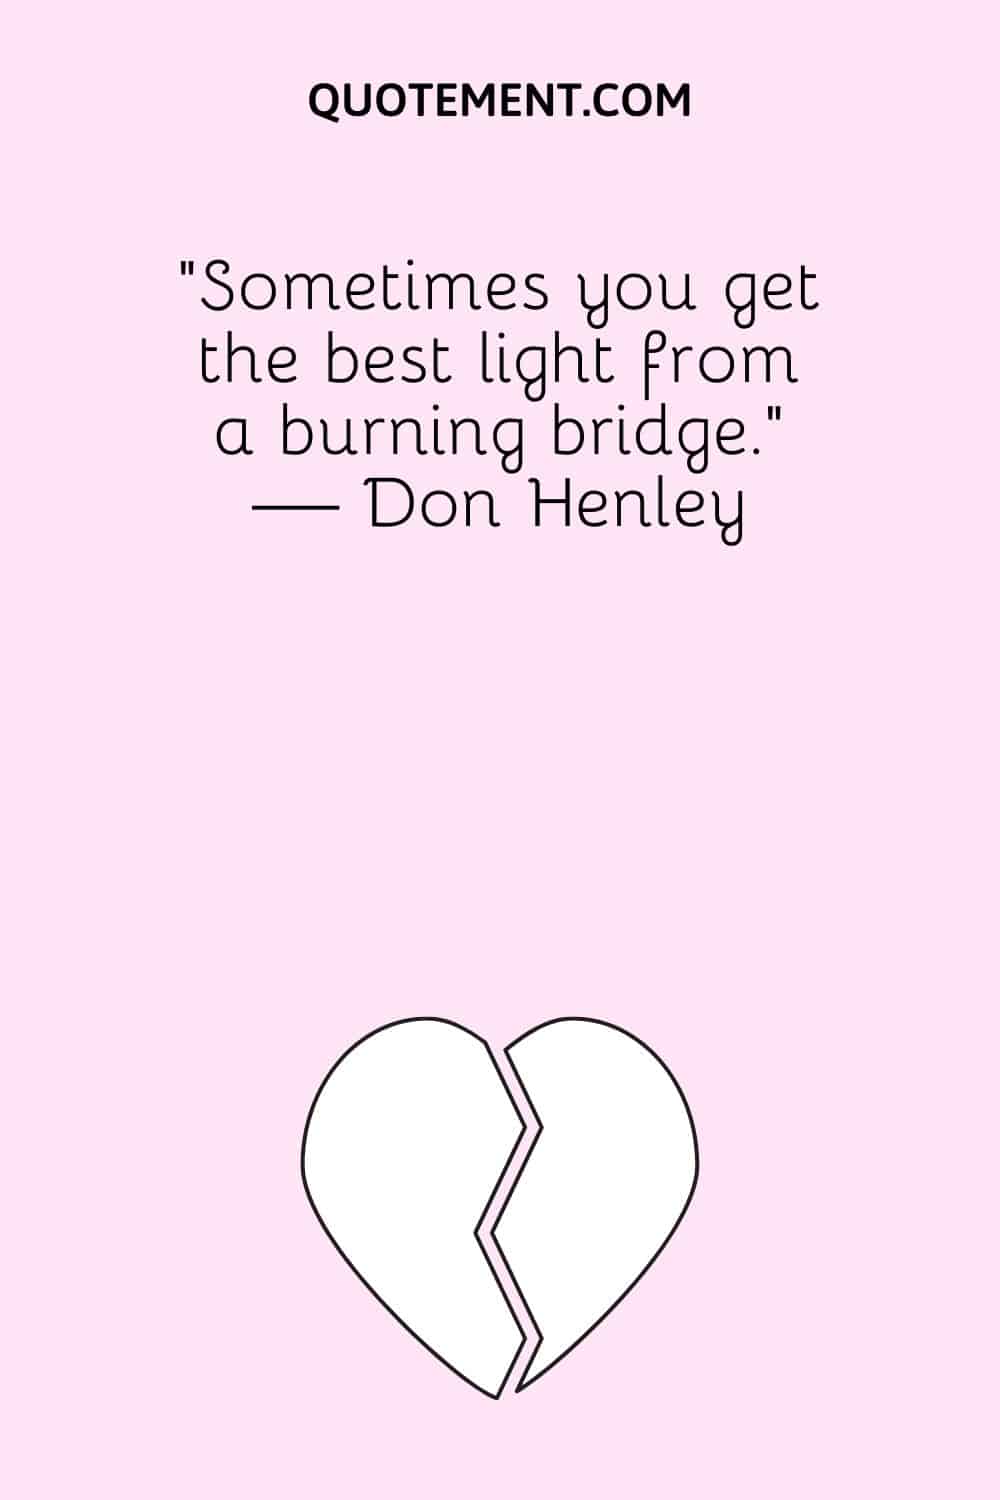 “Sometimes you get the best light from a burning bridge.” — Don Henley